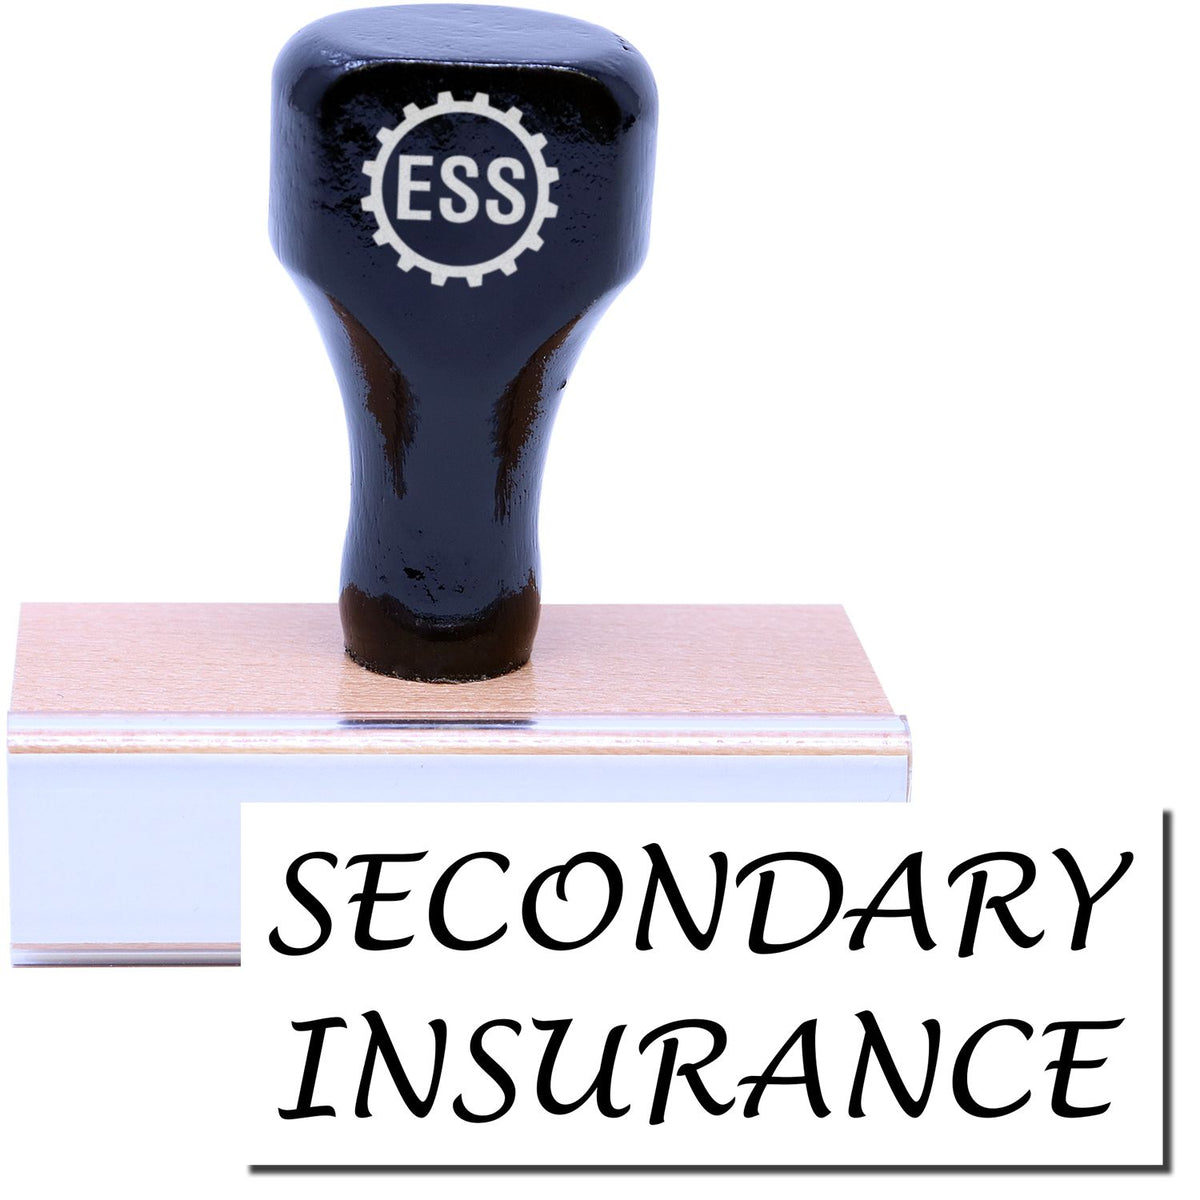 A stock office rubber stamp with a stamped image showing how the text &quot;SECONDARY INSURANCE&quot; in a large font is displayed after stamping.